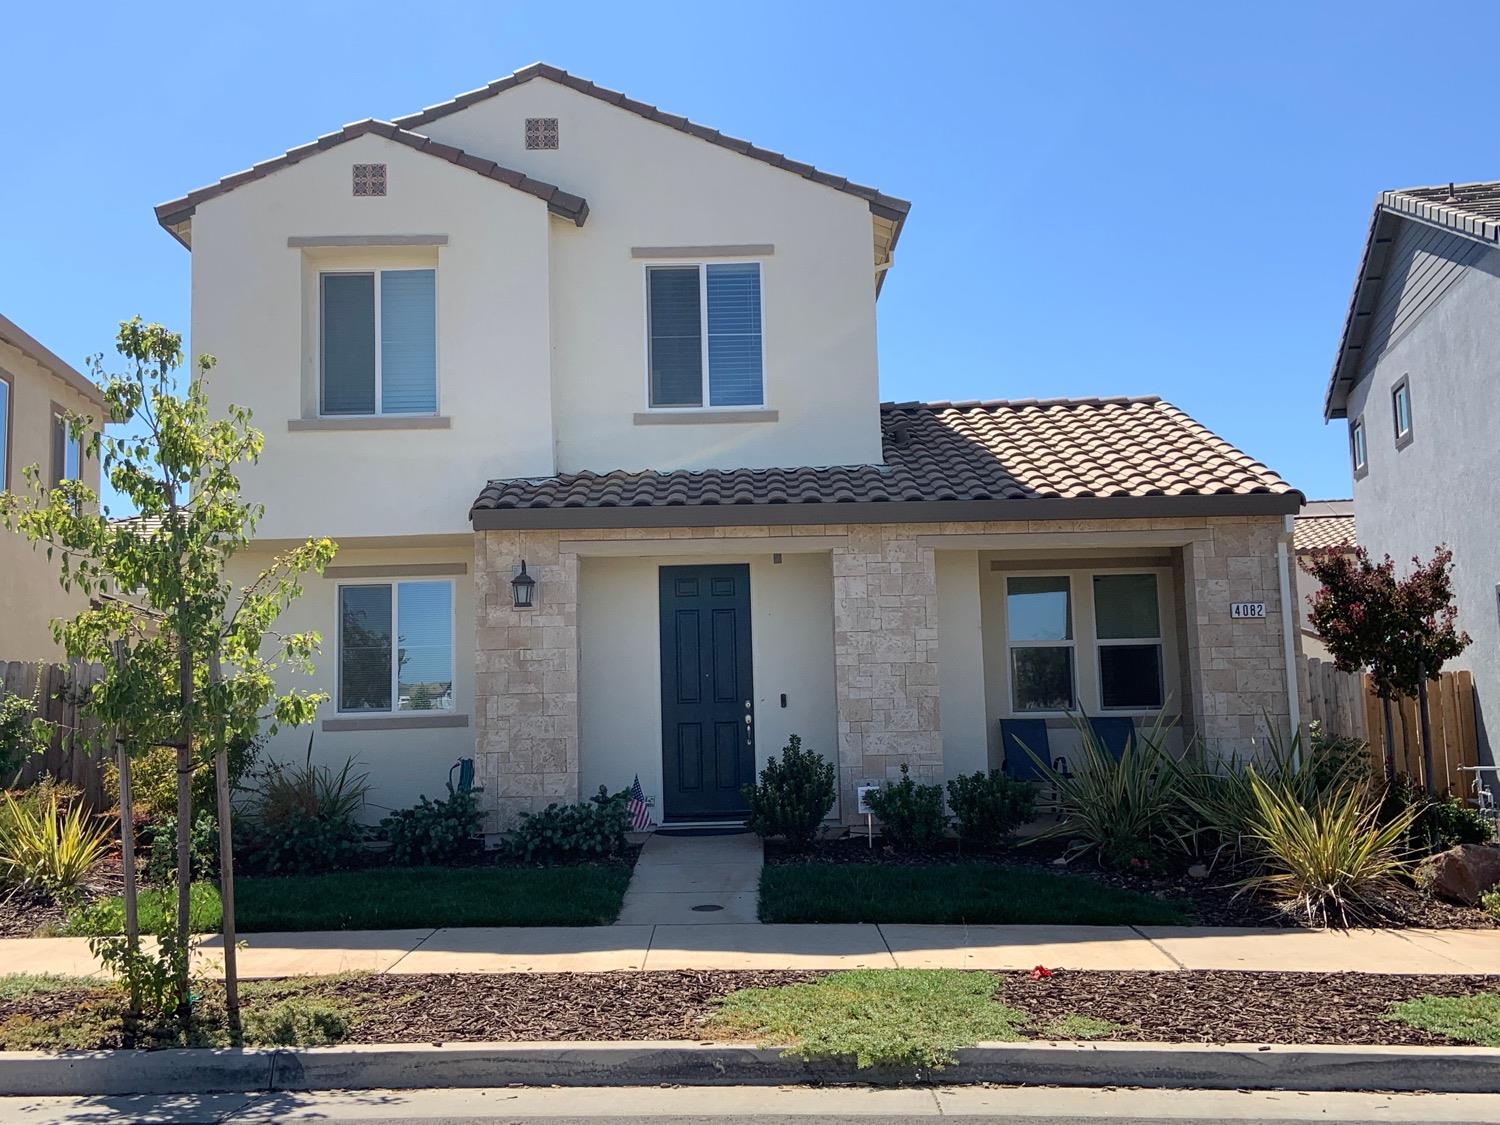 This beautiful Rancho Cordova home offers 3 bedrooms and a large loft which could be a fantastic off